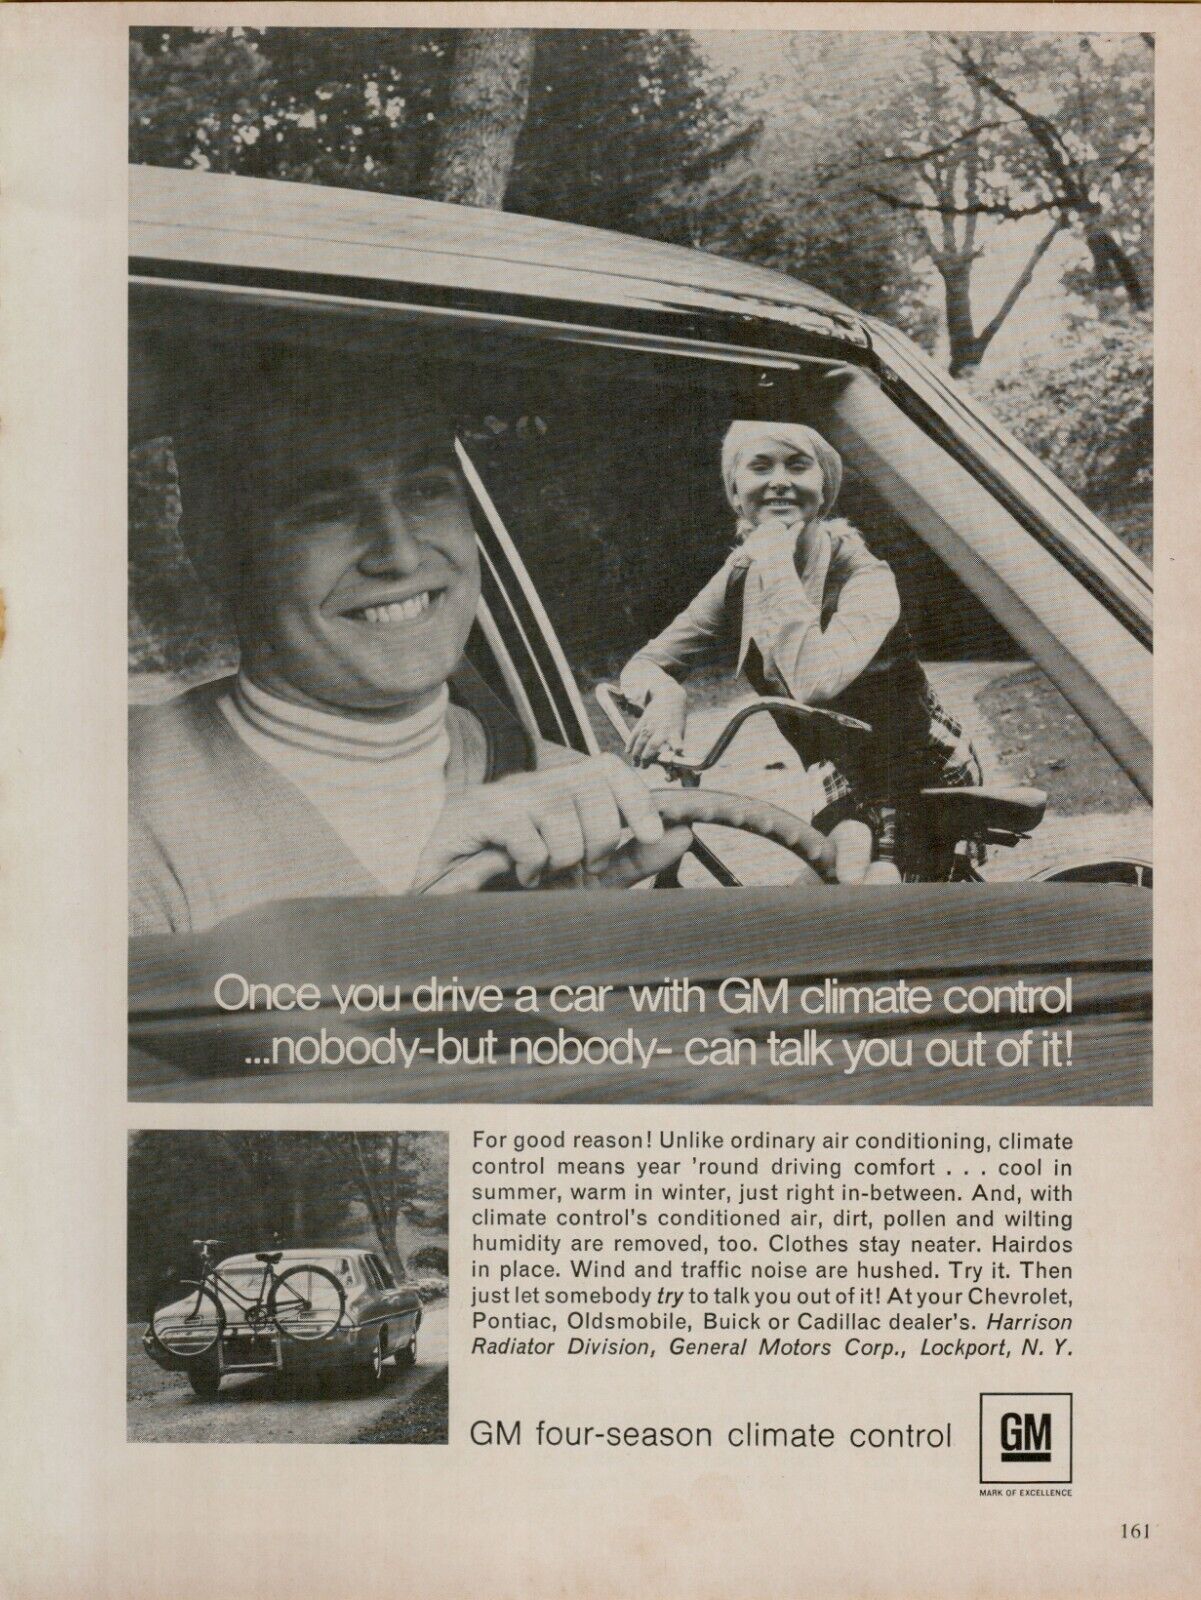 1969 GM Climate Control Year-round Comfort Blonde Model Bicycle Vintage Print Ad